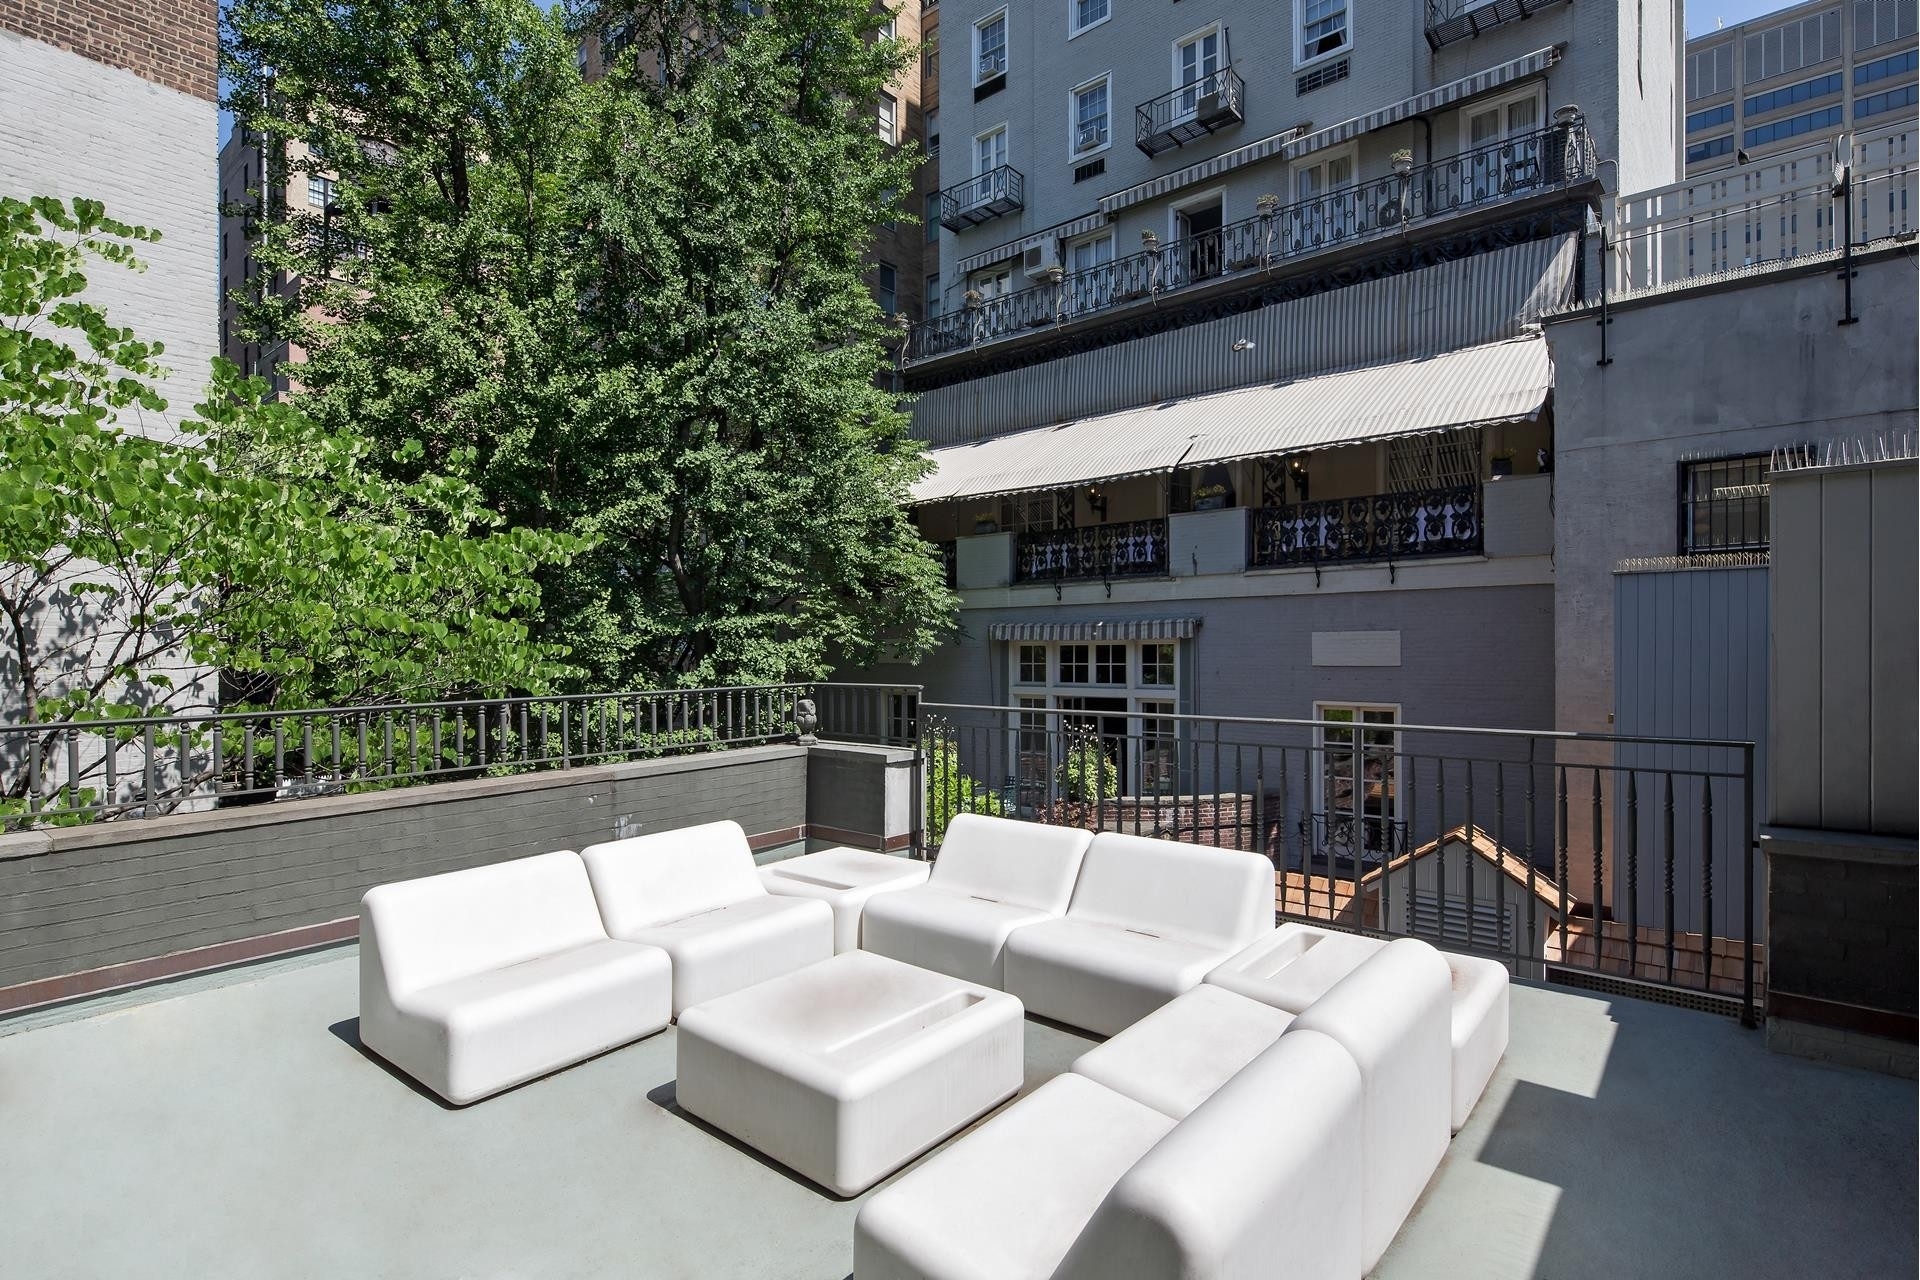 2. Single Family Townhouse for Sale at 131 E 65TH ST, TOWNHOUSE Lenox Hill, New York, New York 10065